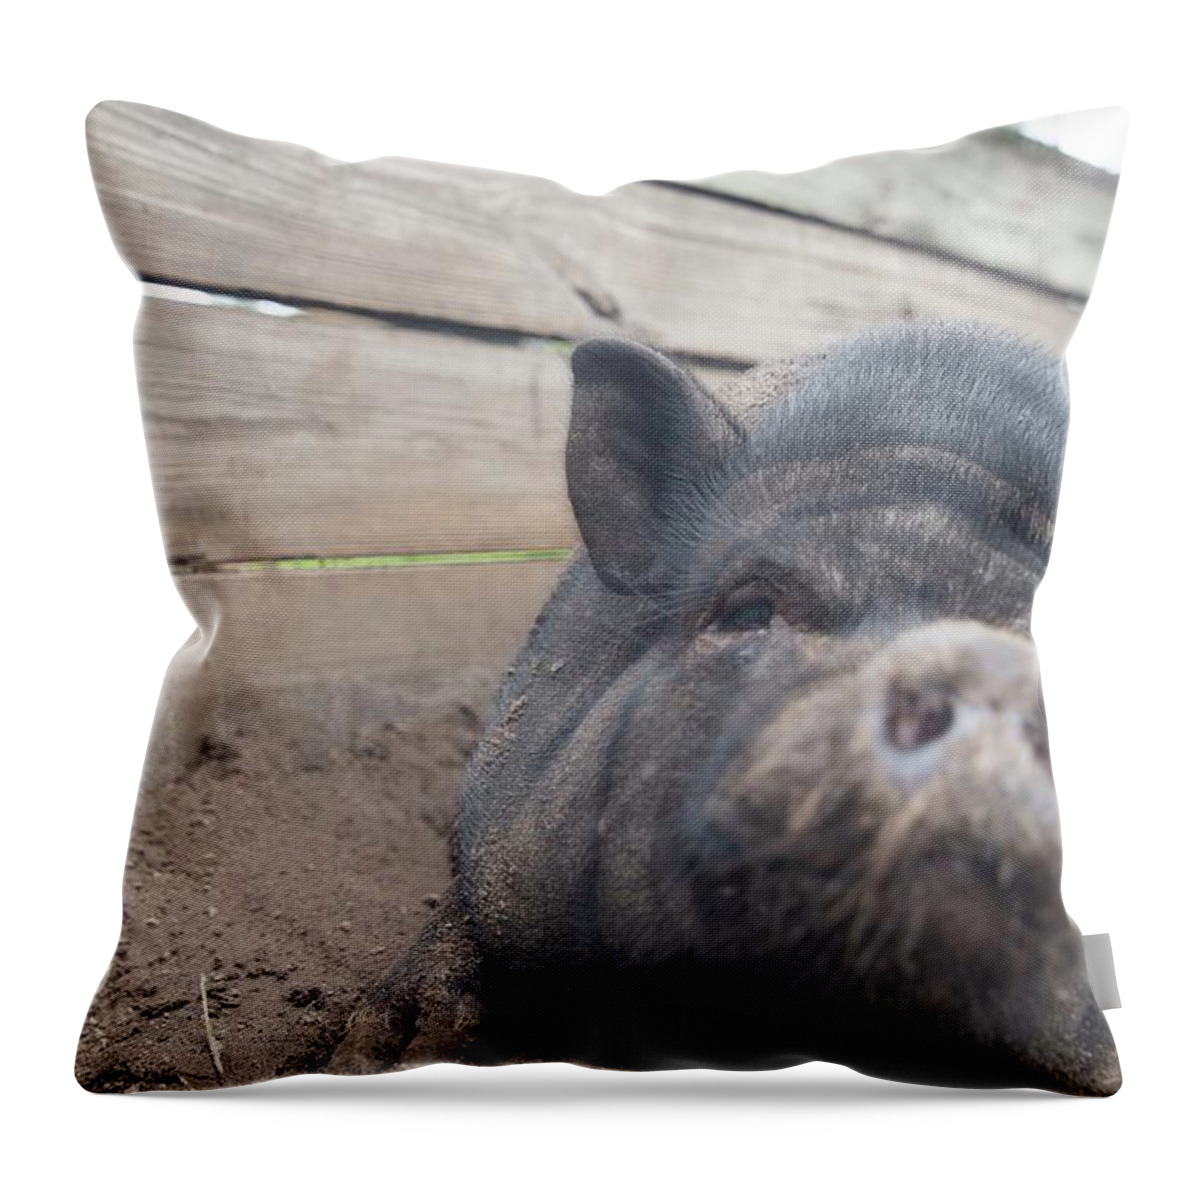 Dade City Throw Pillow featuring the photograph pig by Dmdcreative Photography